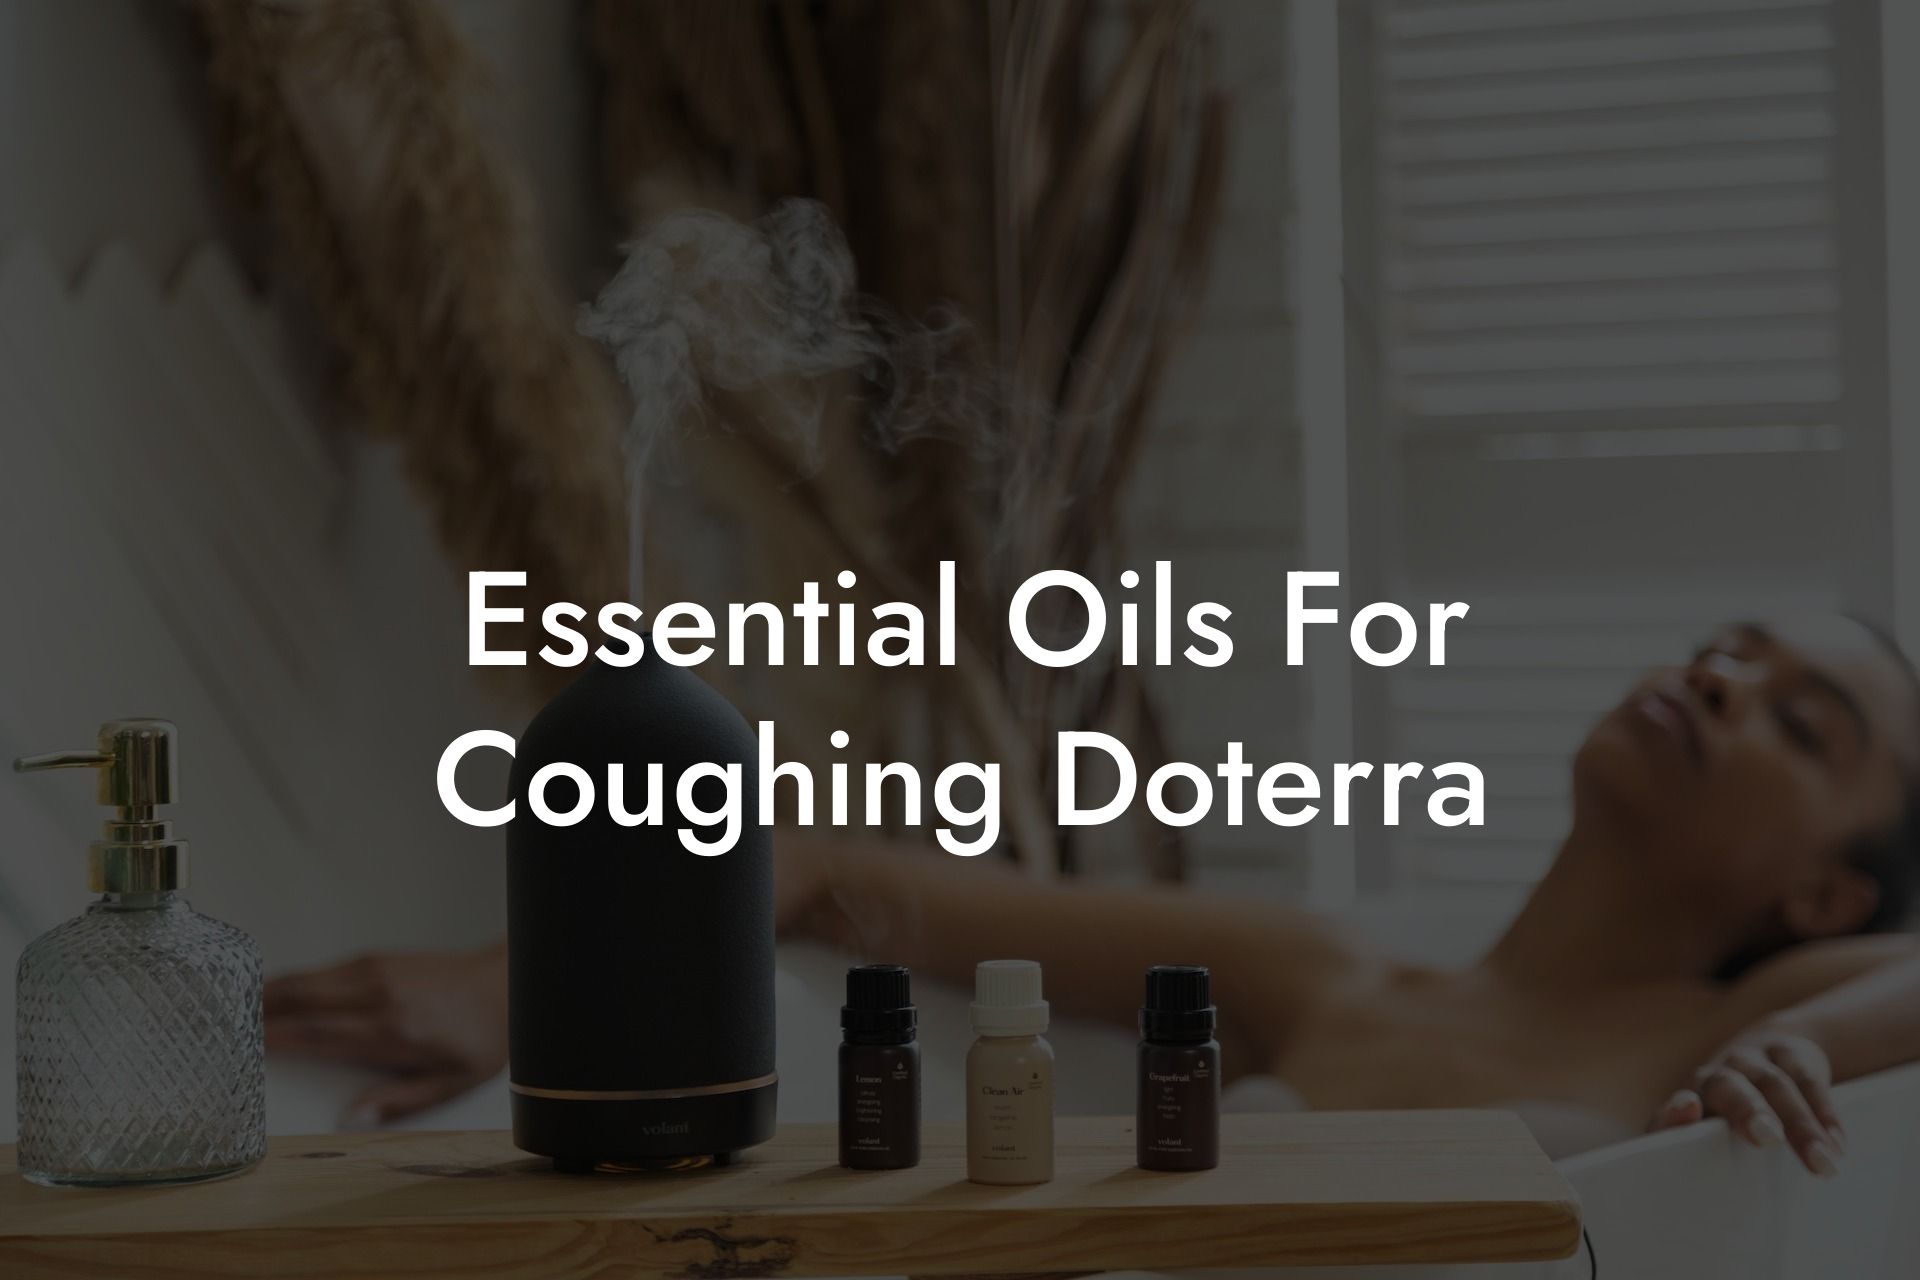 Essential Oils For Coughing Doterra